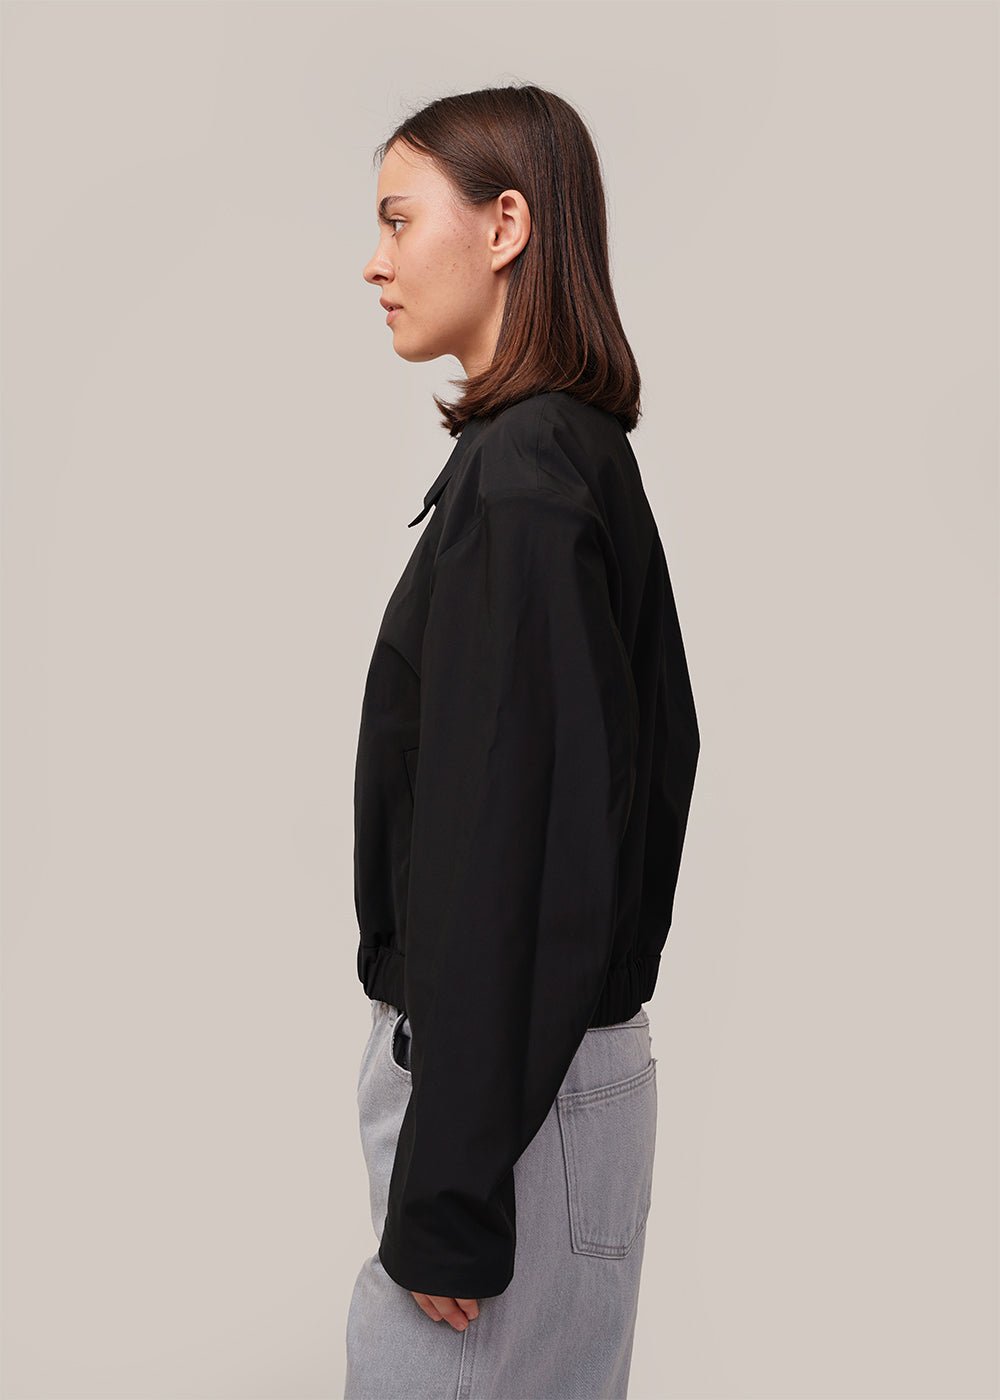 AMOMENTO Black Reversible Crop Jumper - New Classics Studios Sustainable Ethical Fashion Canada